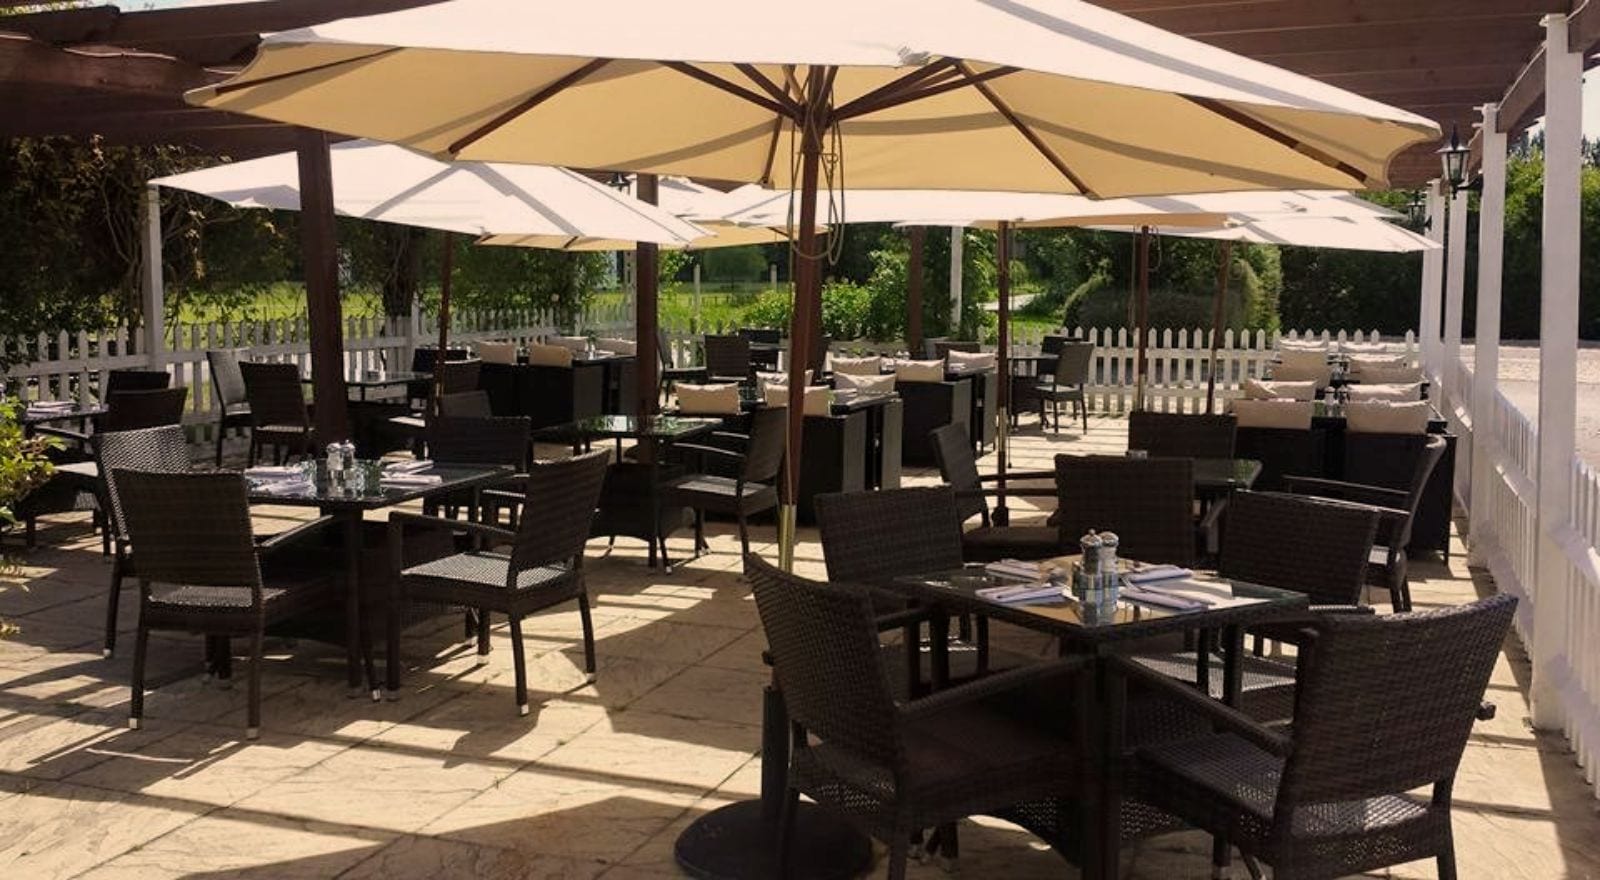 Photo of the Terrace at The Spring - www.thespringinn.co.uk